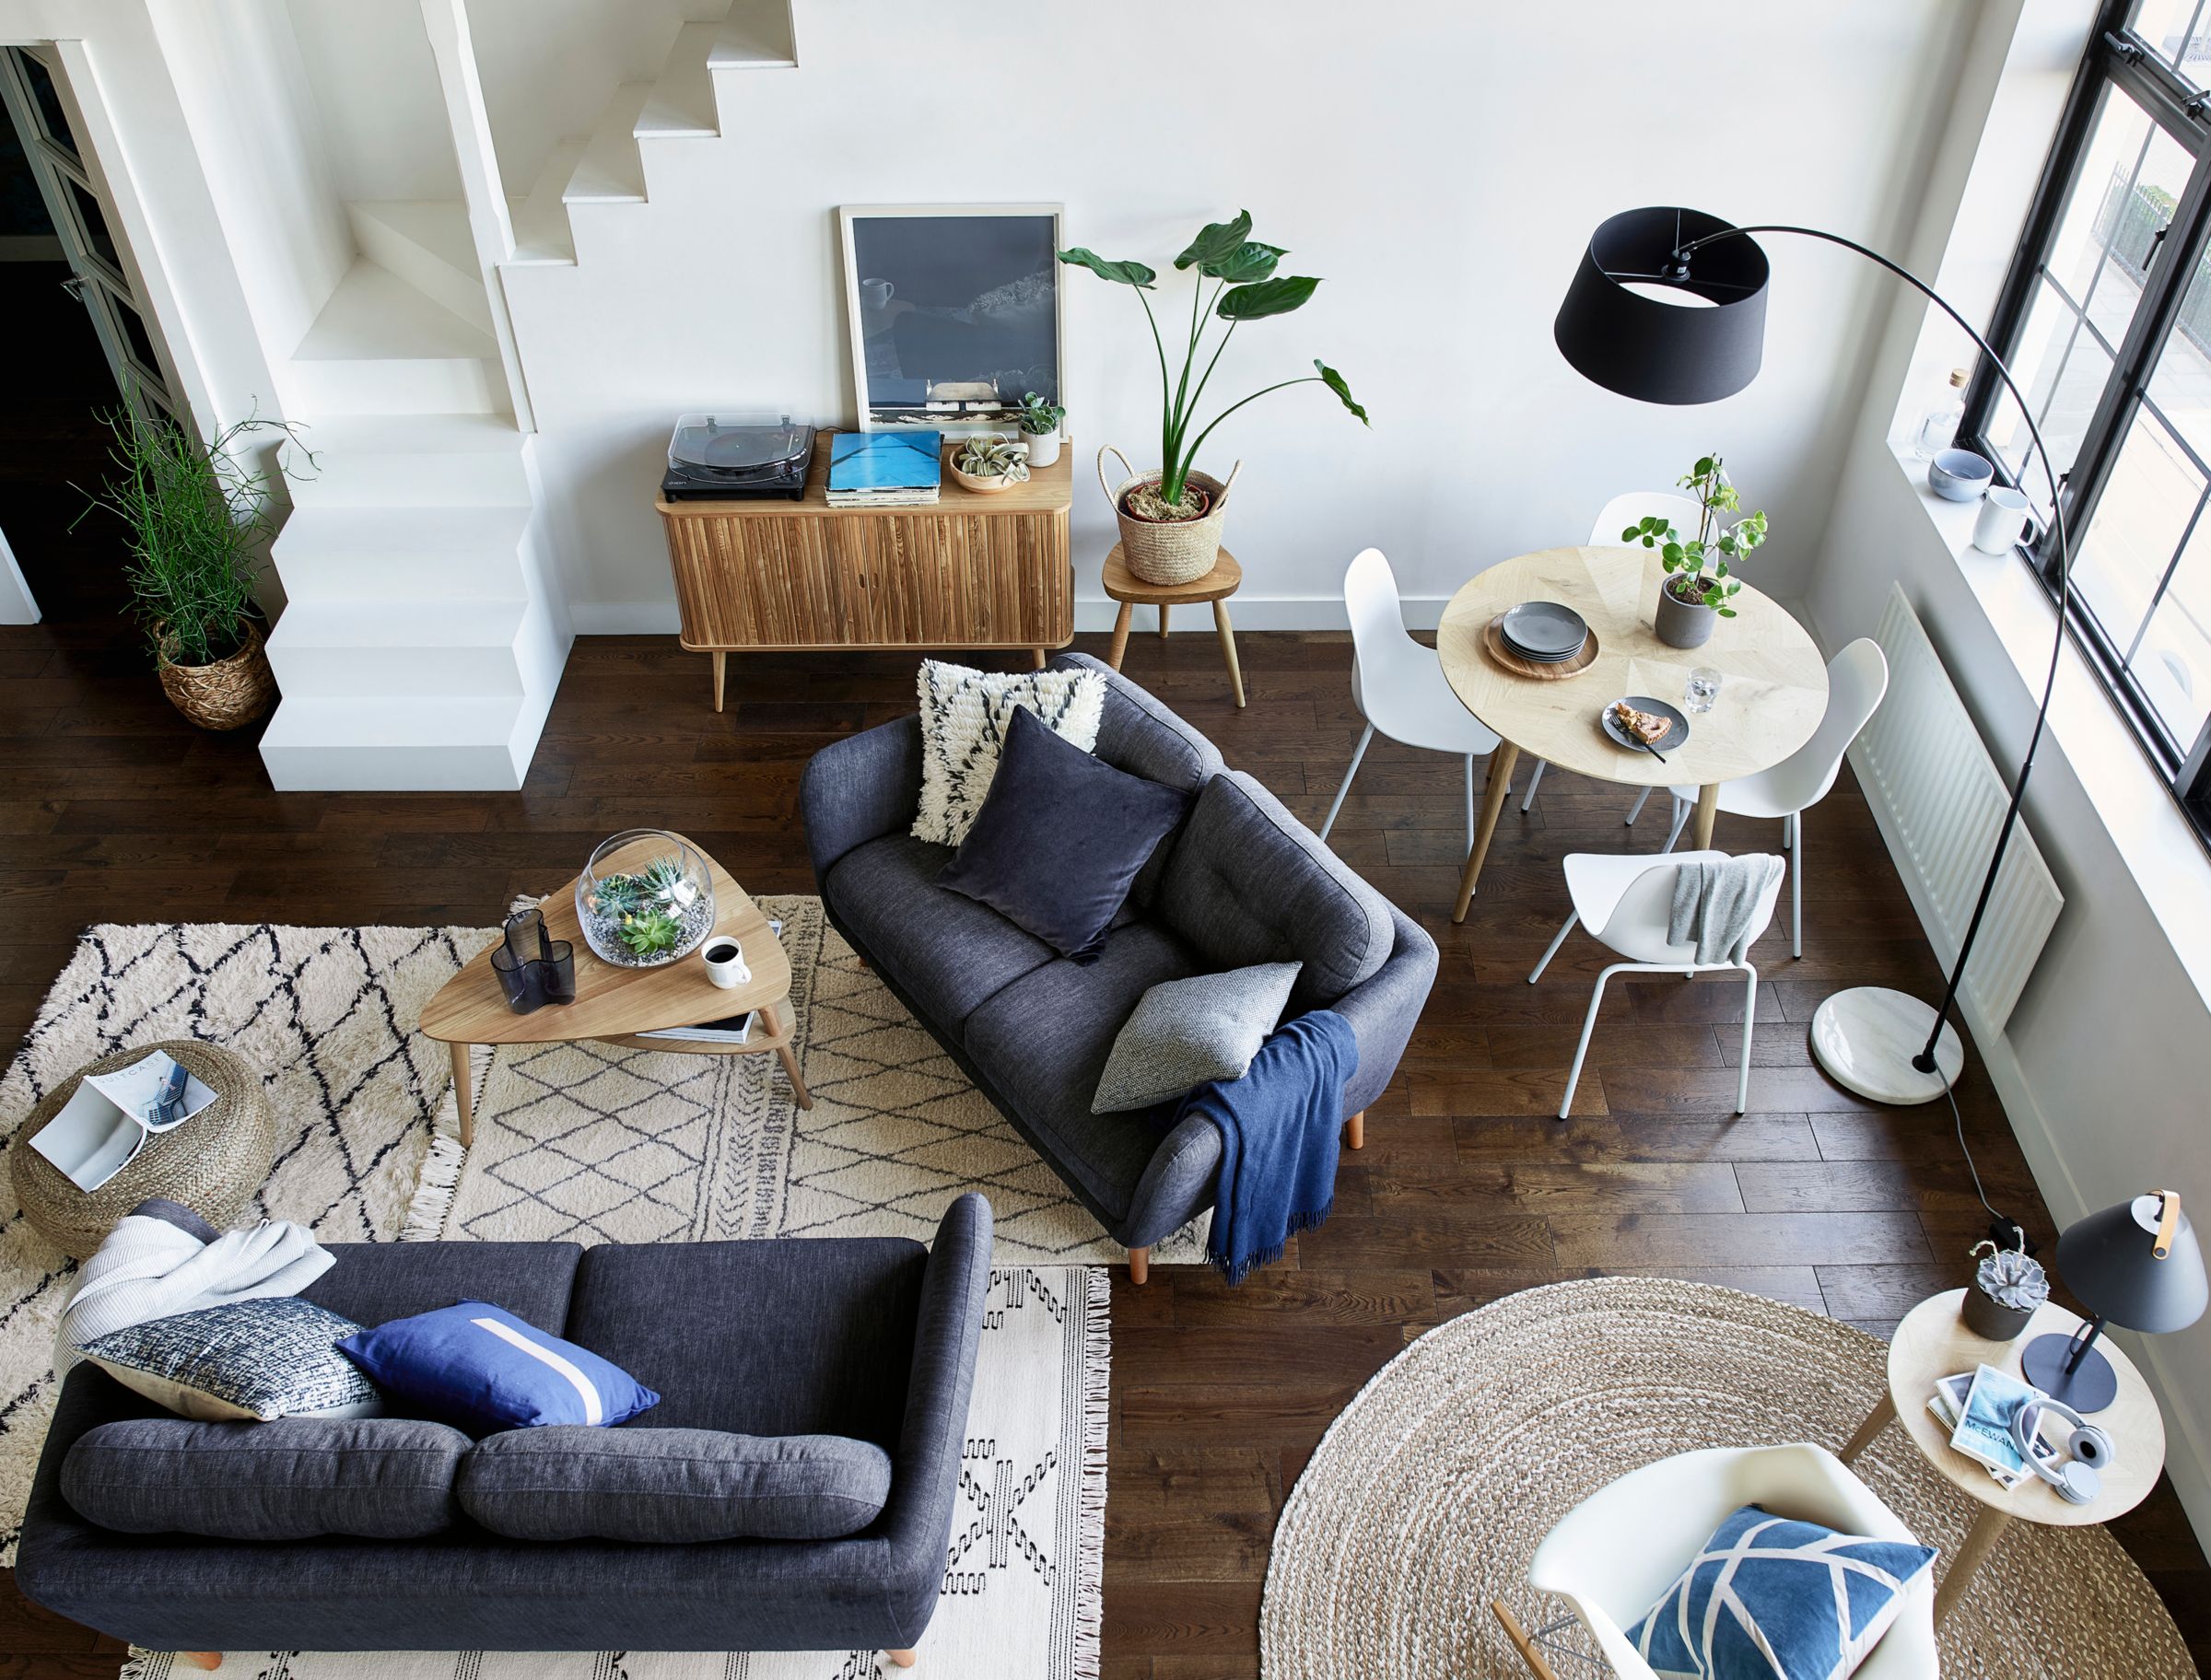 5 ways to make your living space work harder for your household